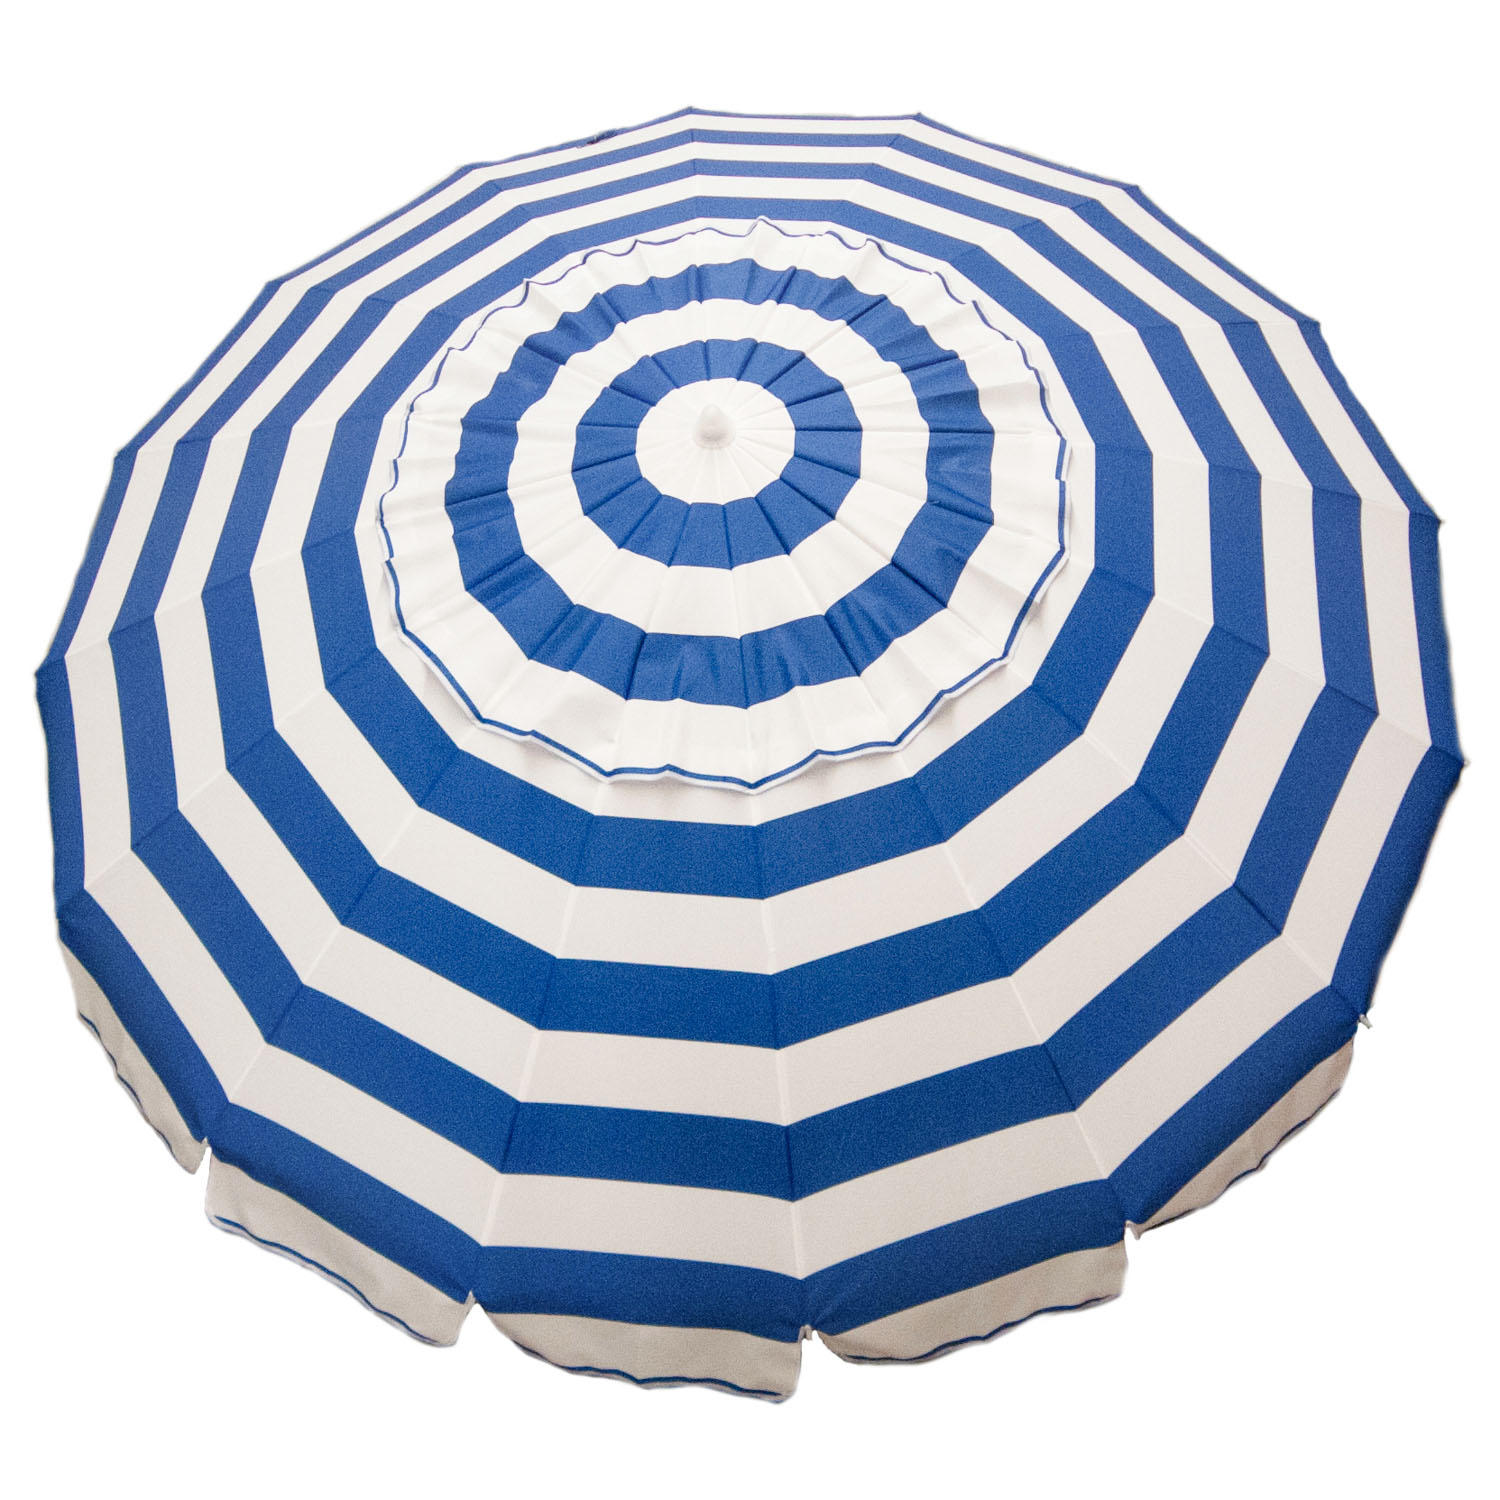 Deluxe 8 ft. Outdoor Umbrella with Travel Bag (Blue and White Stripe)